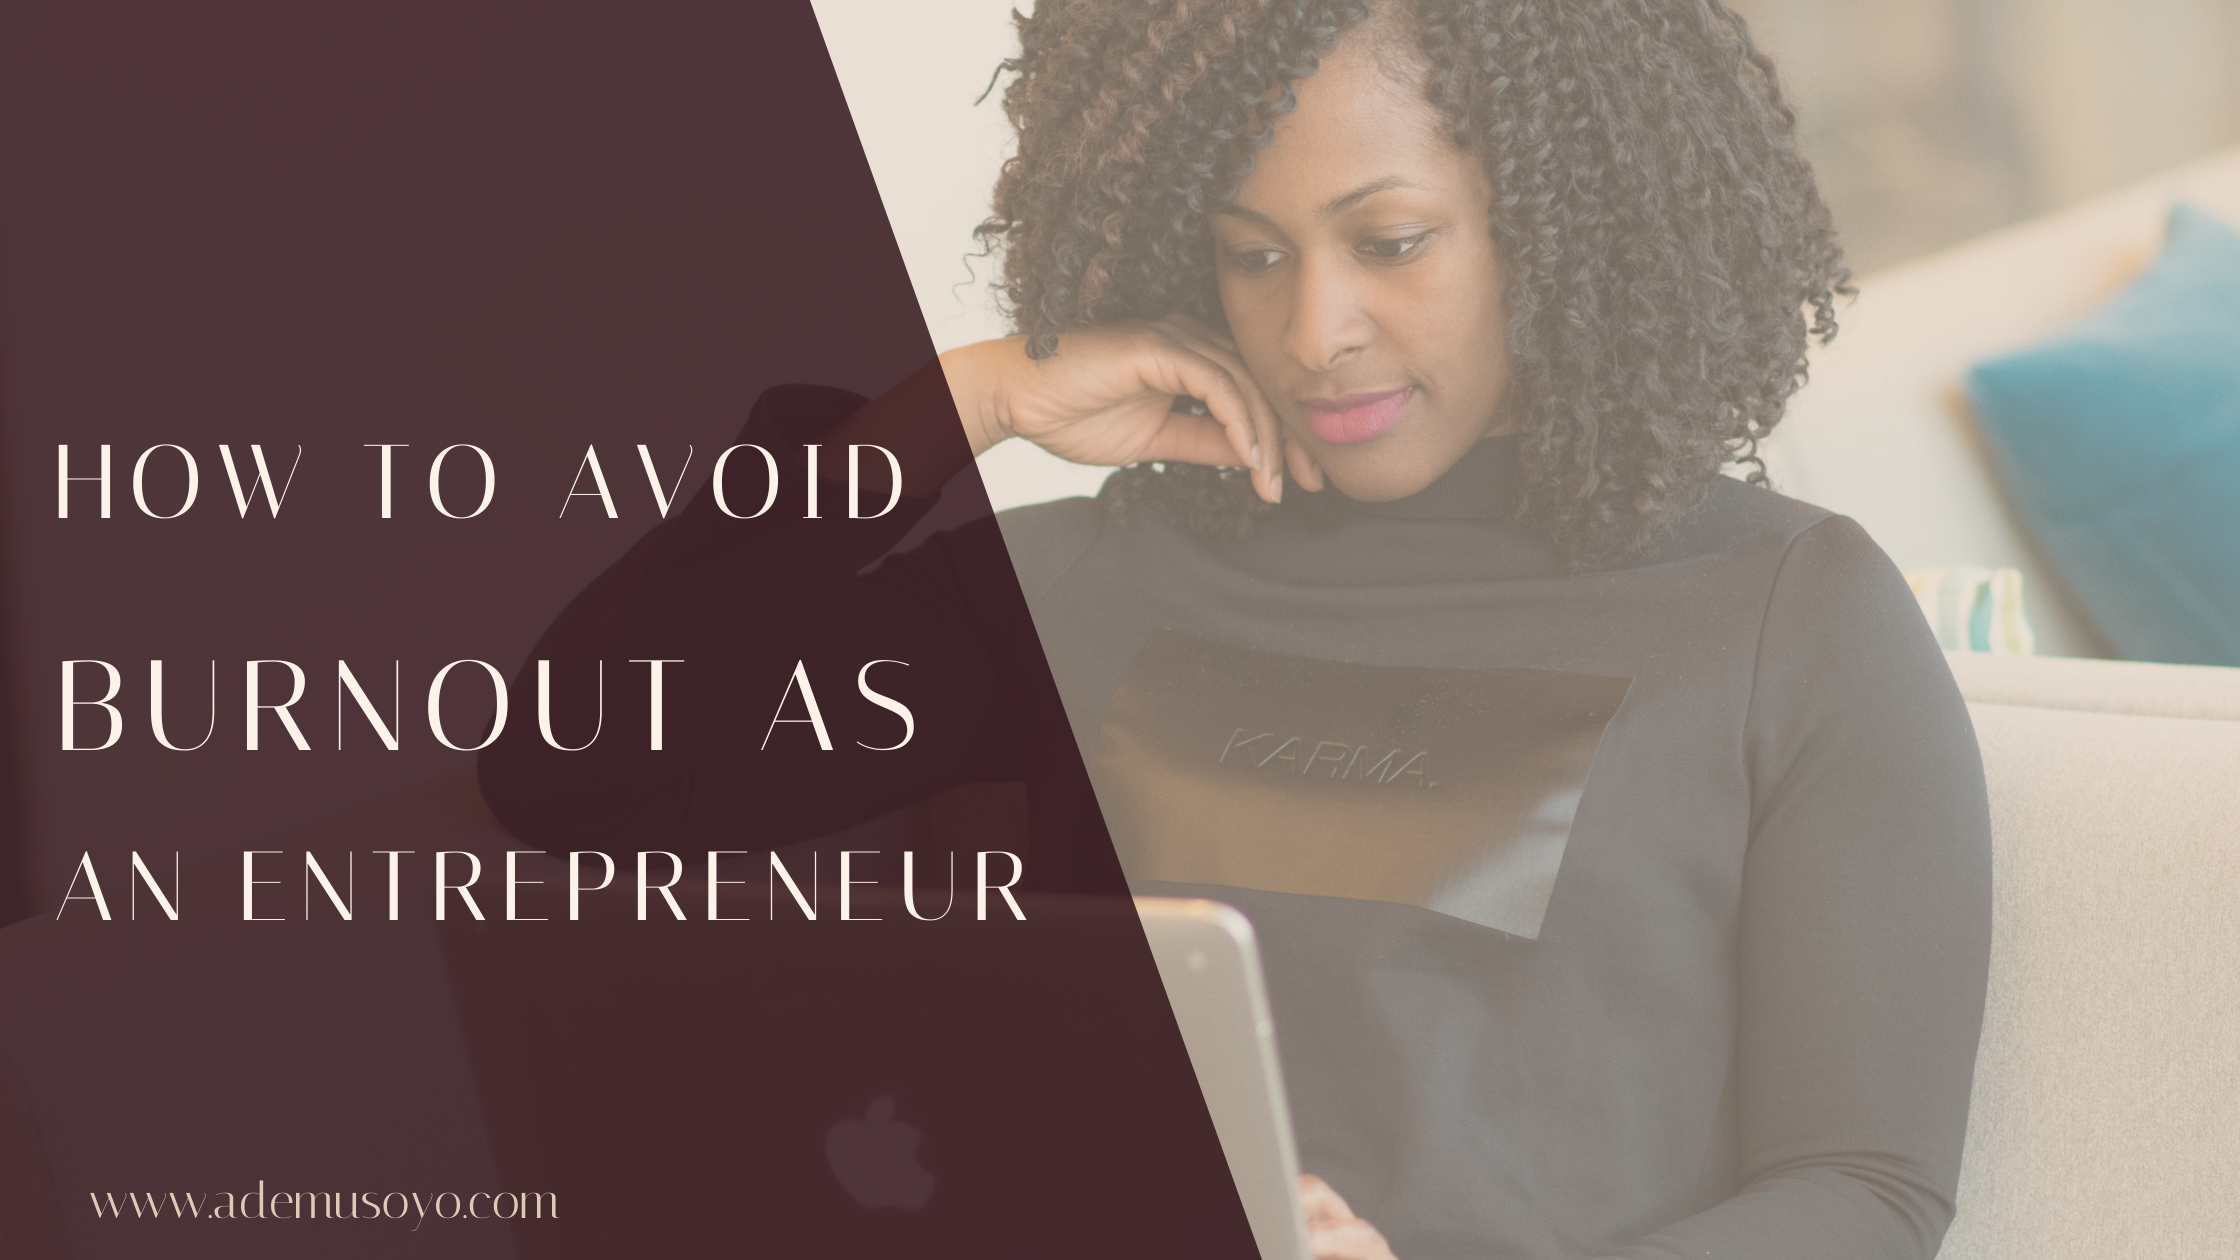 a female entrepreneur working on her laptop in the background with an overlay text that says "how to avoid burnout as an entrepreneur". Burnout tips and prevention